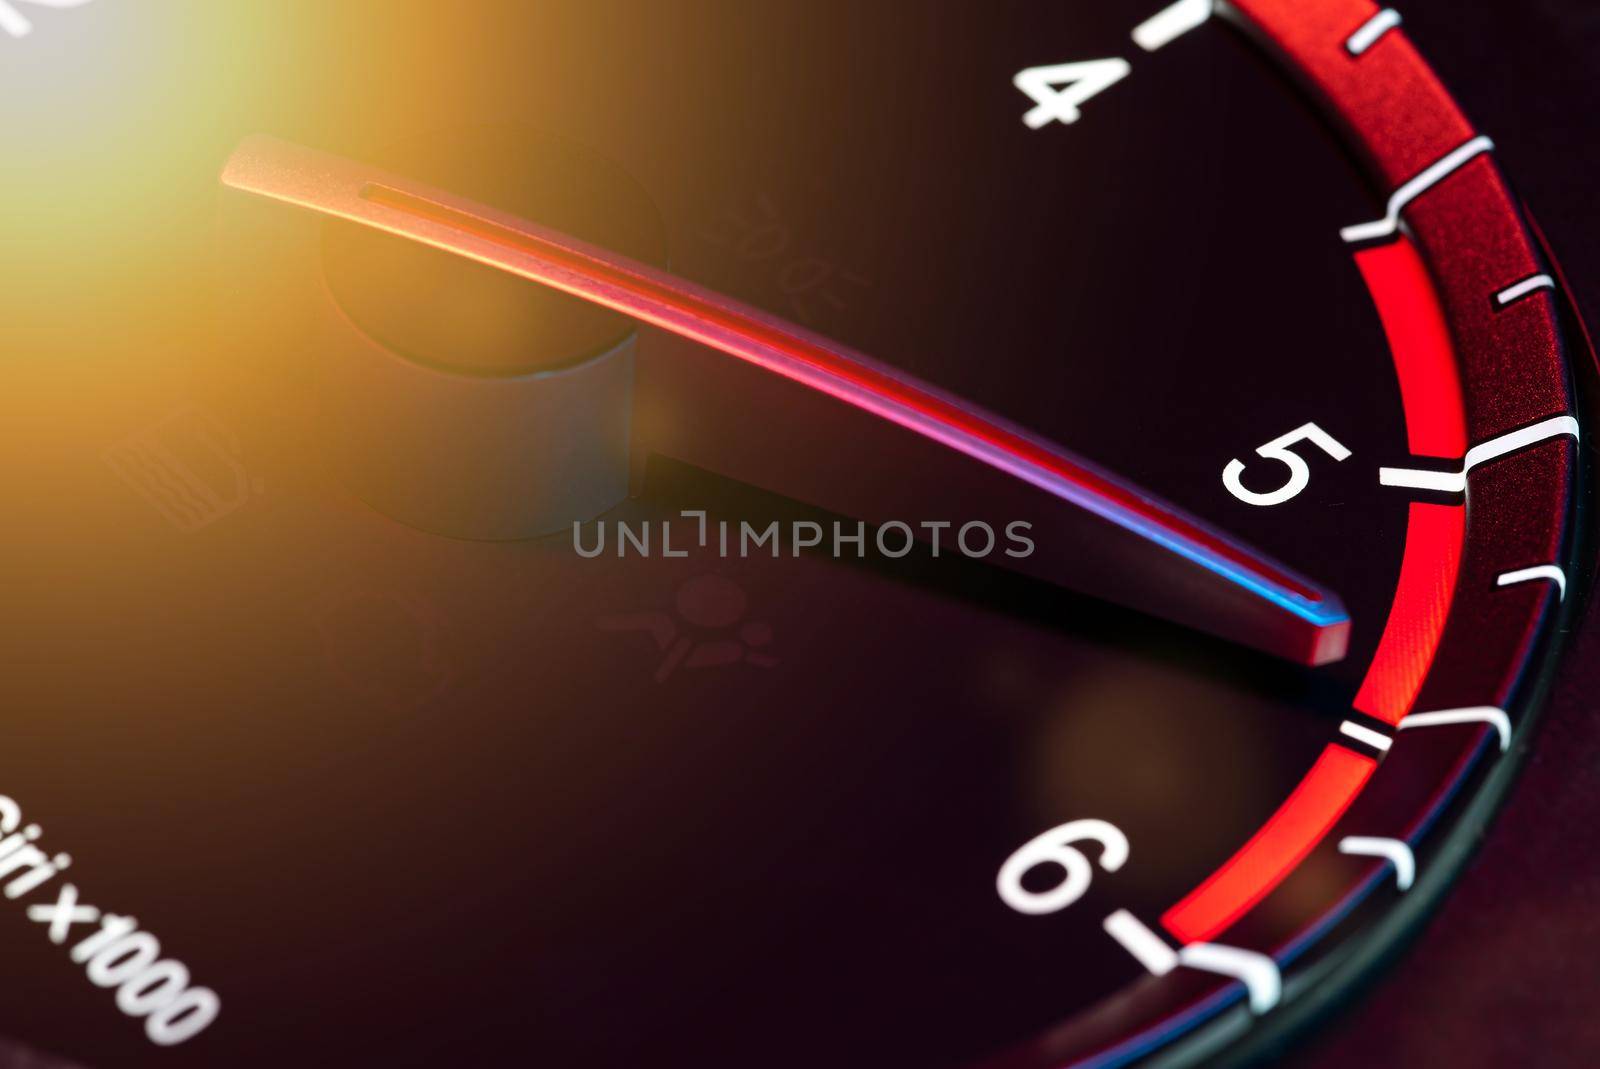 Rpm car odometer detail 3 by pippocarlot